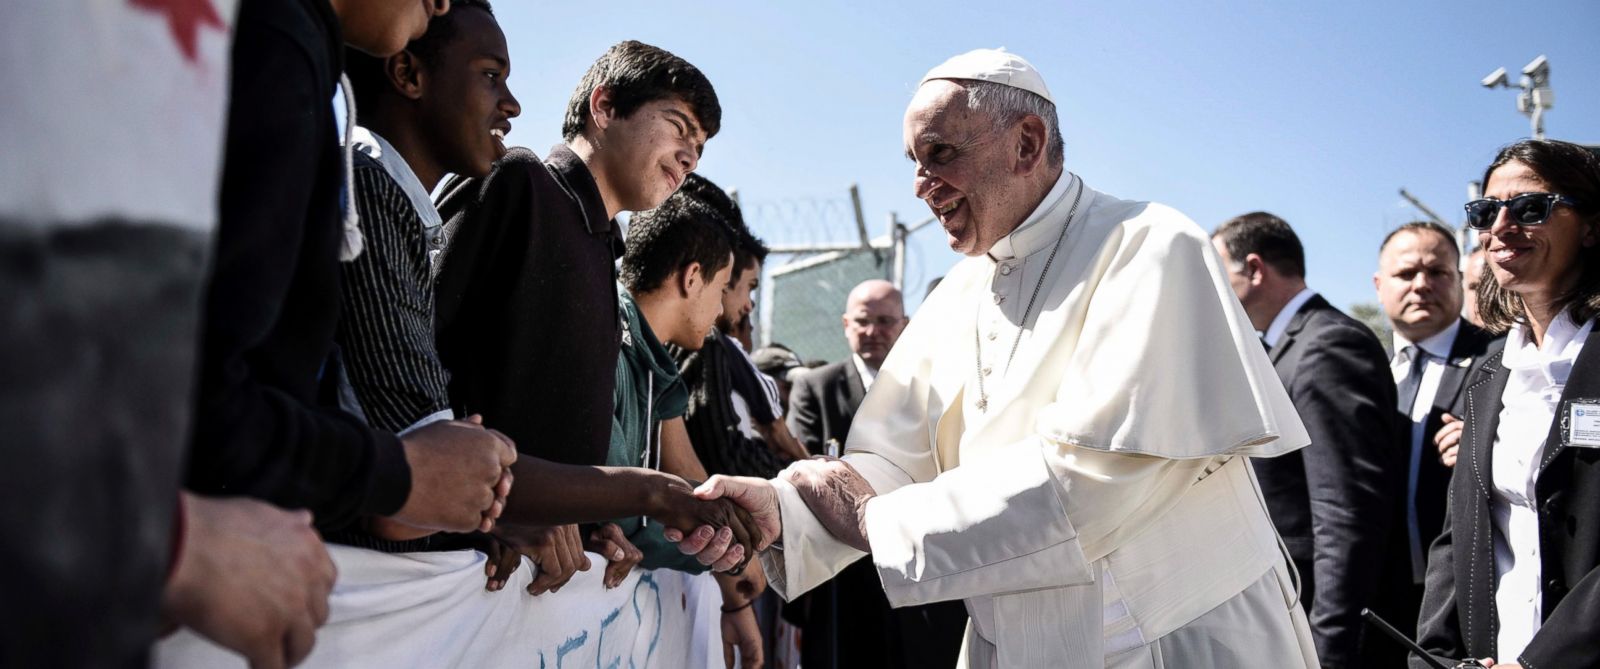 PHOTO: Pope Francis greets migrants and refugees during a visit at the Moria refugee camp on the island of Lesbos, Greece, April 16, 2016.